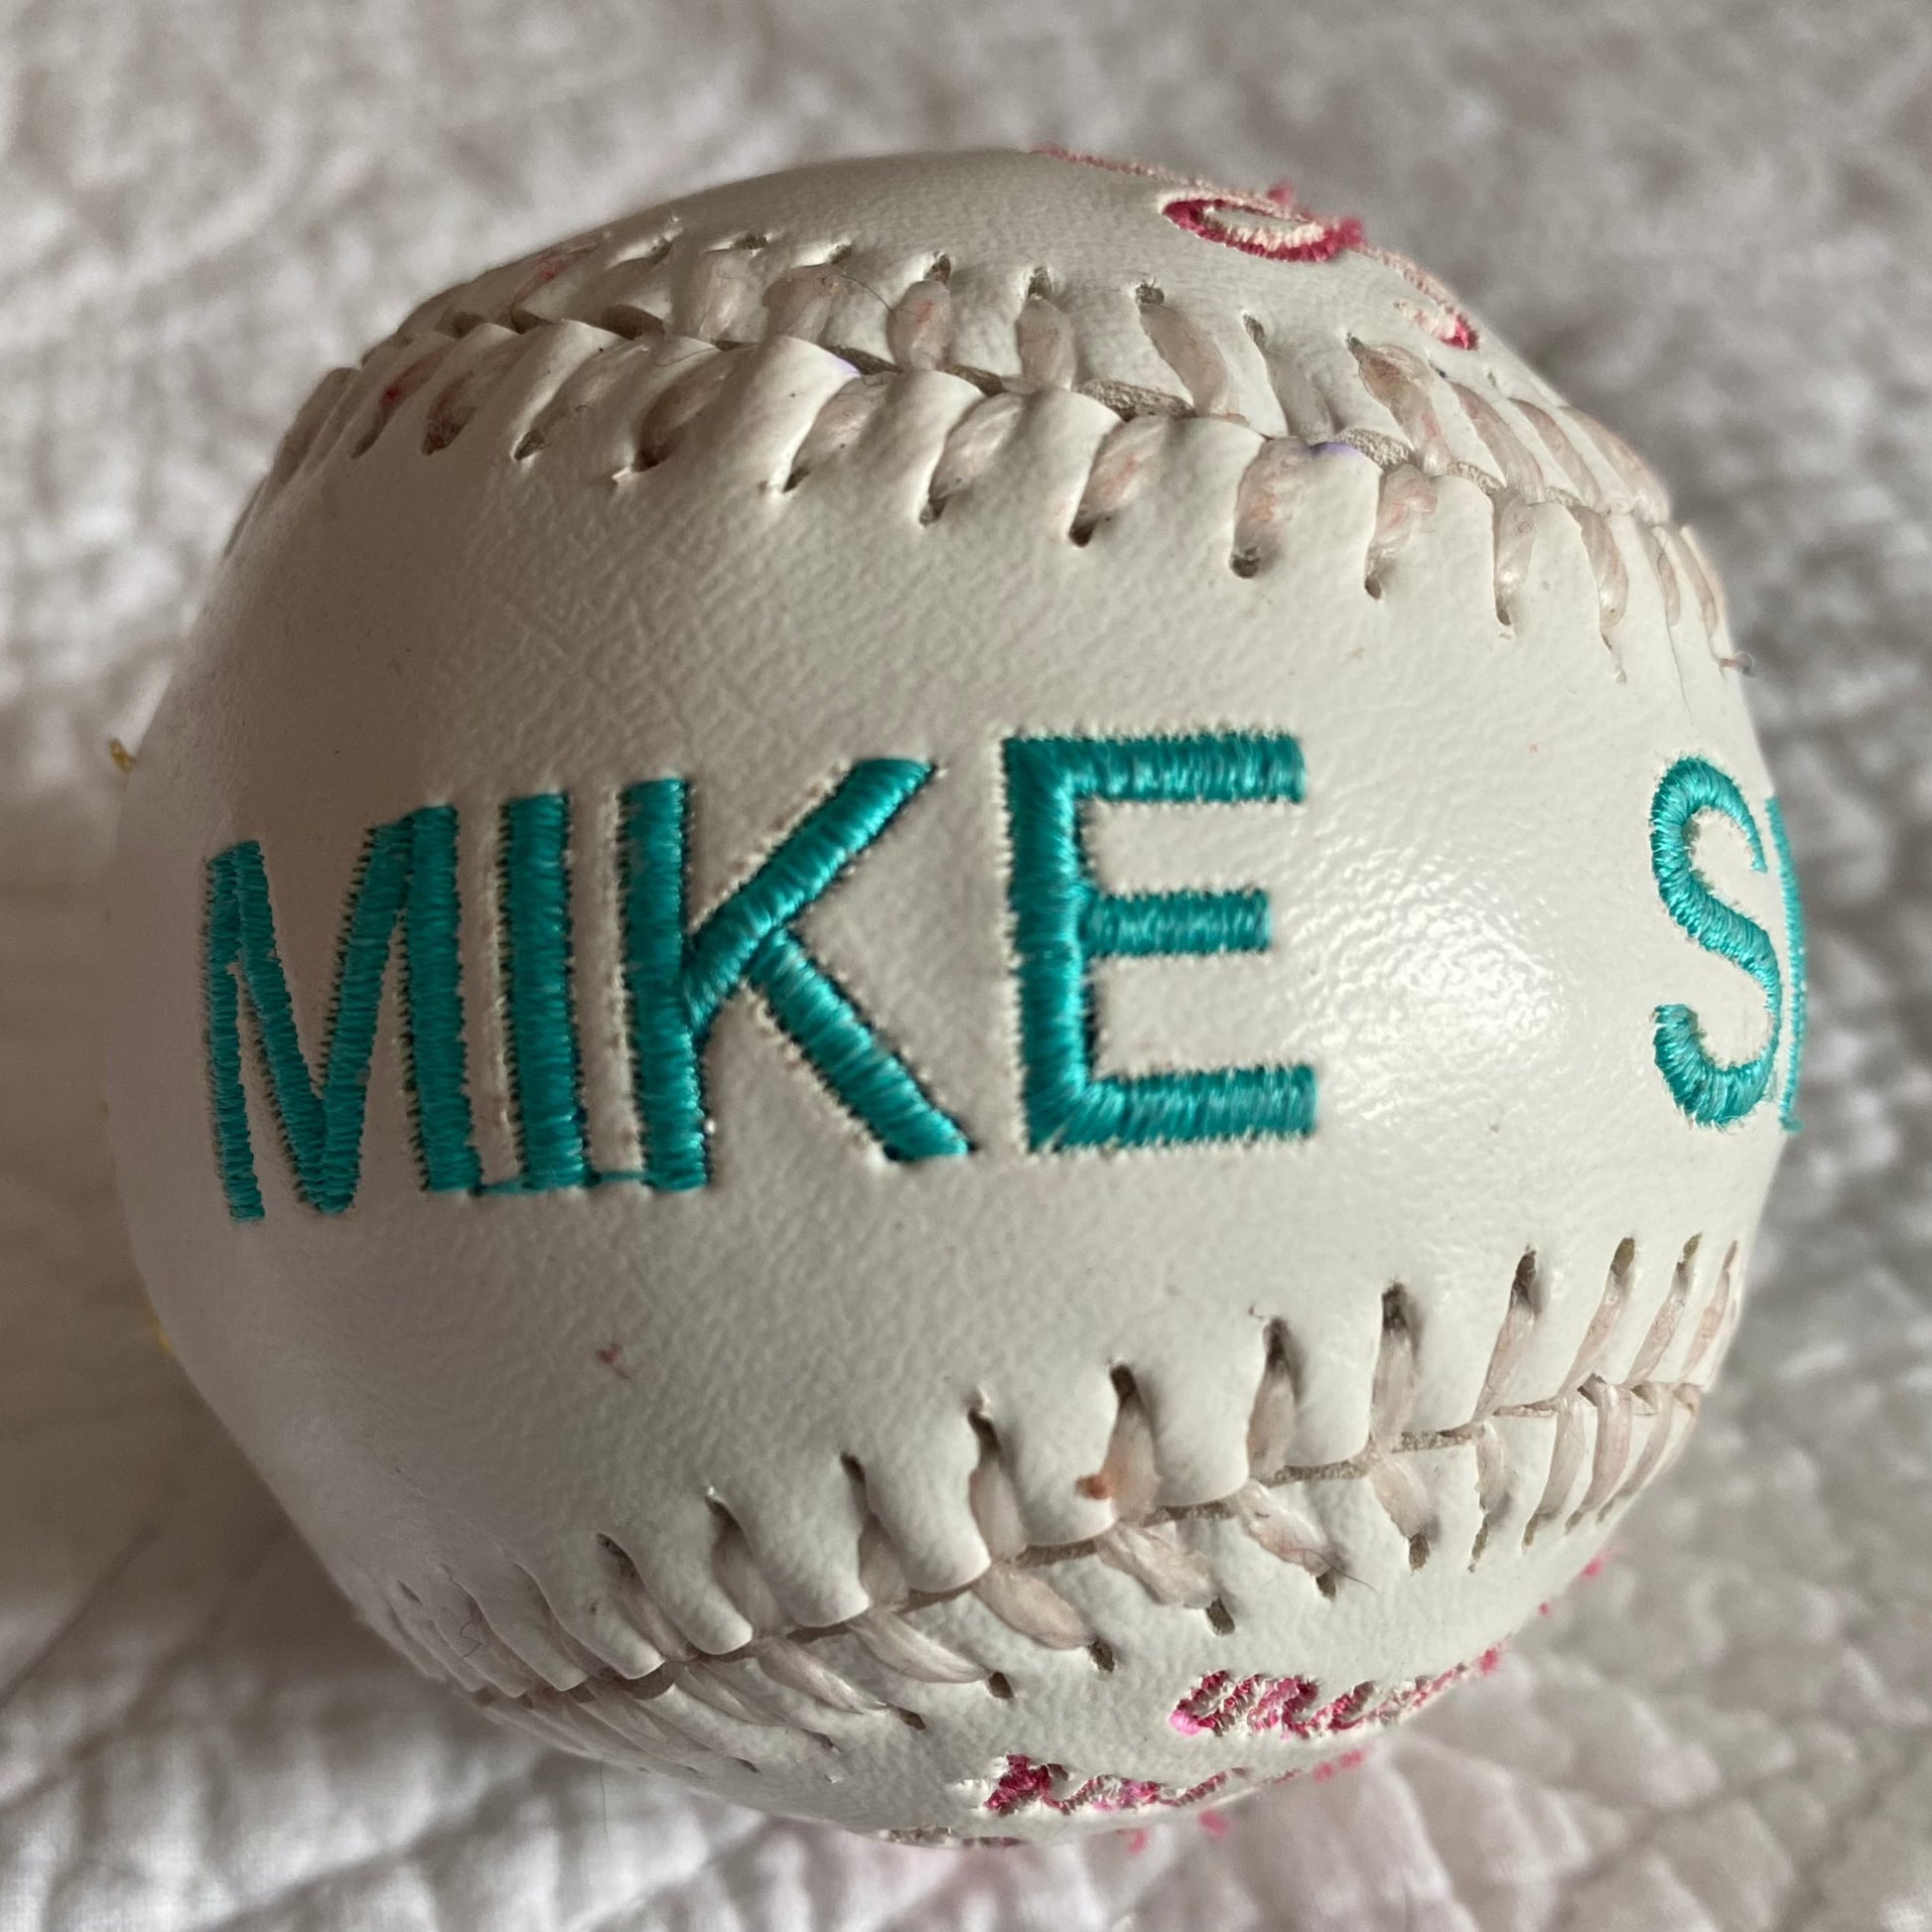 Custom embroidered baseball or softball.  Done in your chosen colors with red or white  lacing